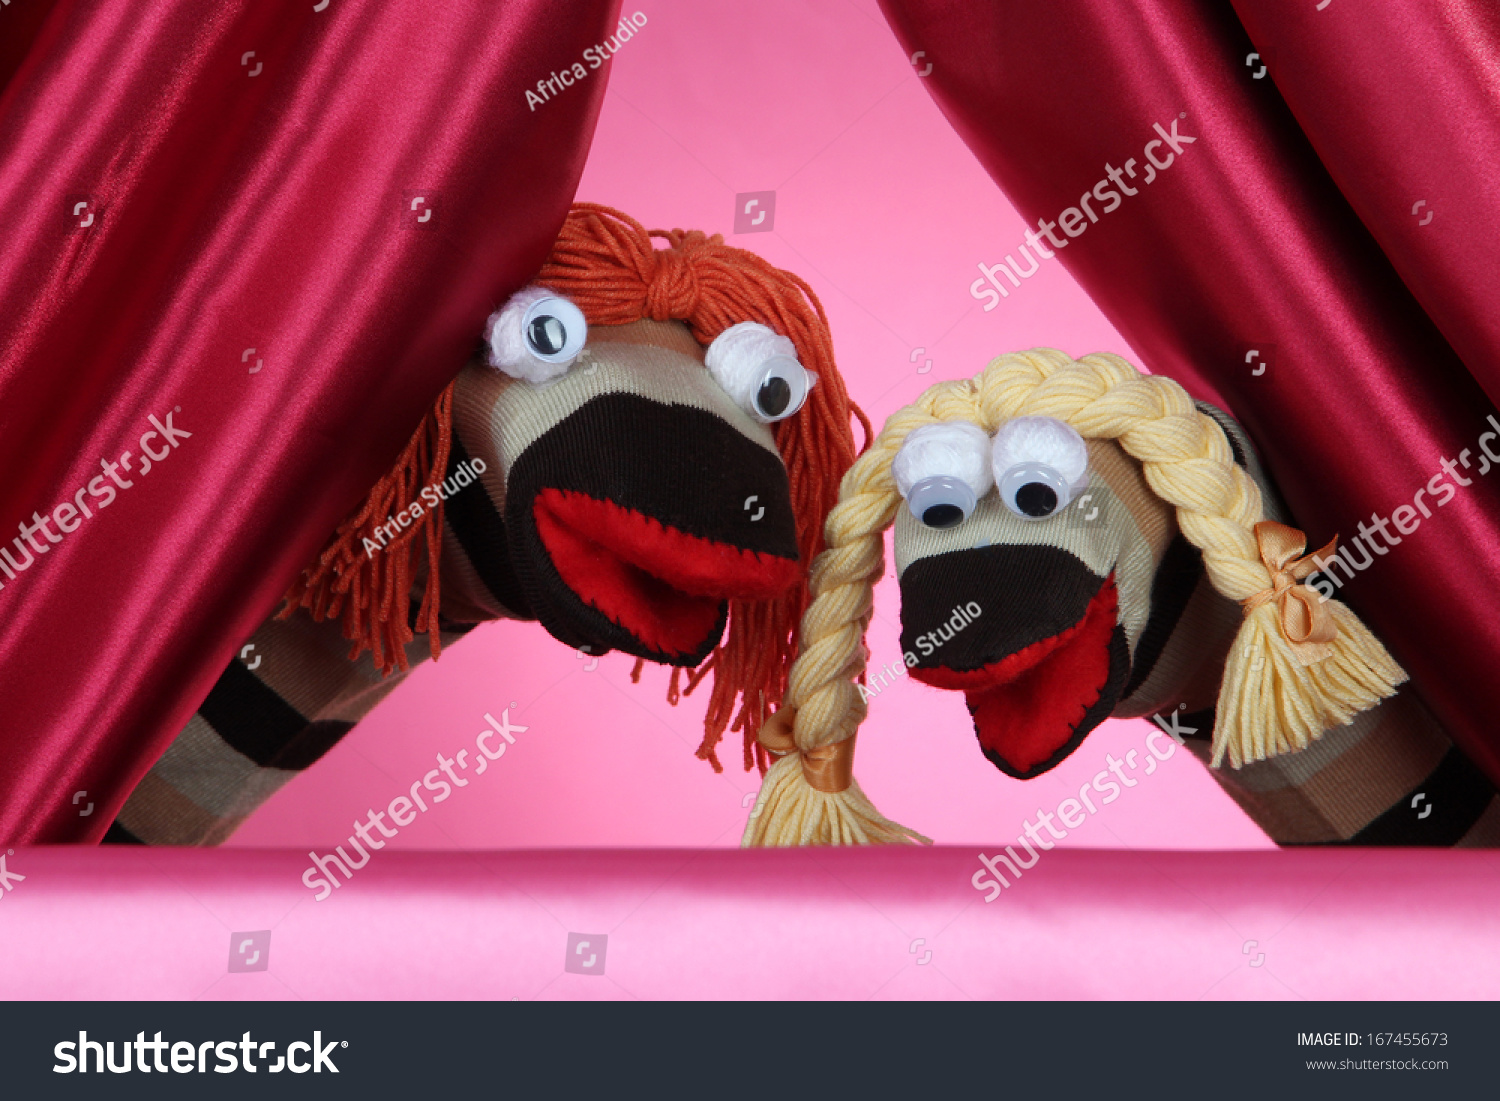 Puppet show on pink background #167455673